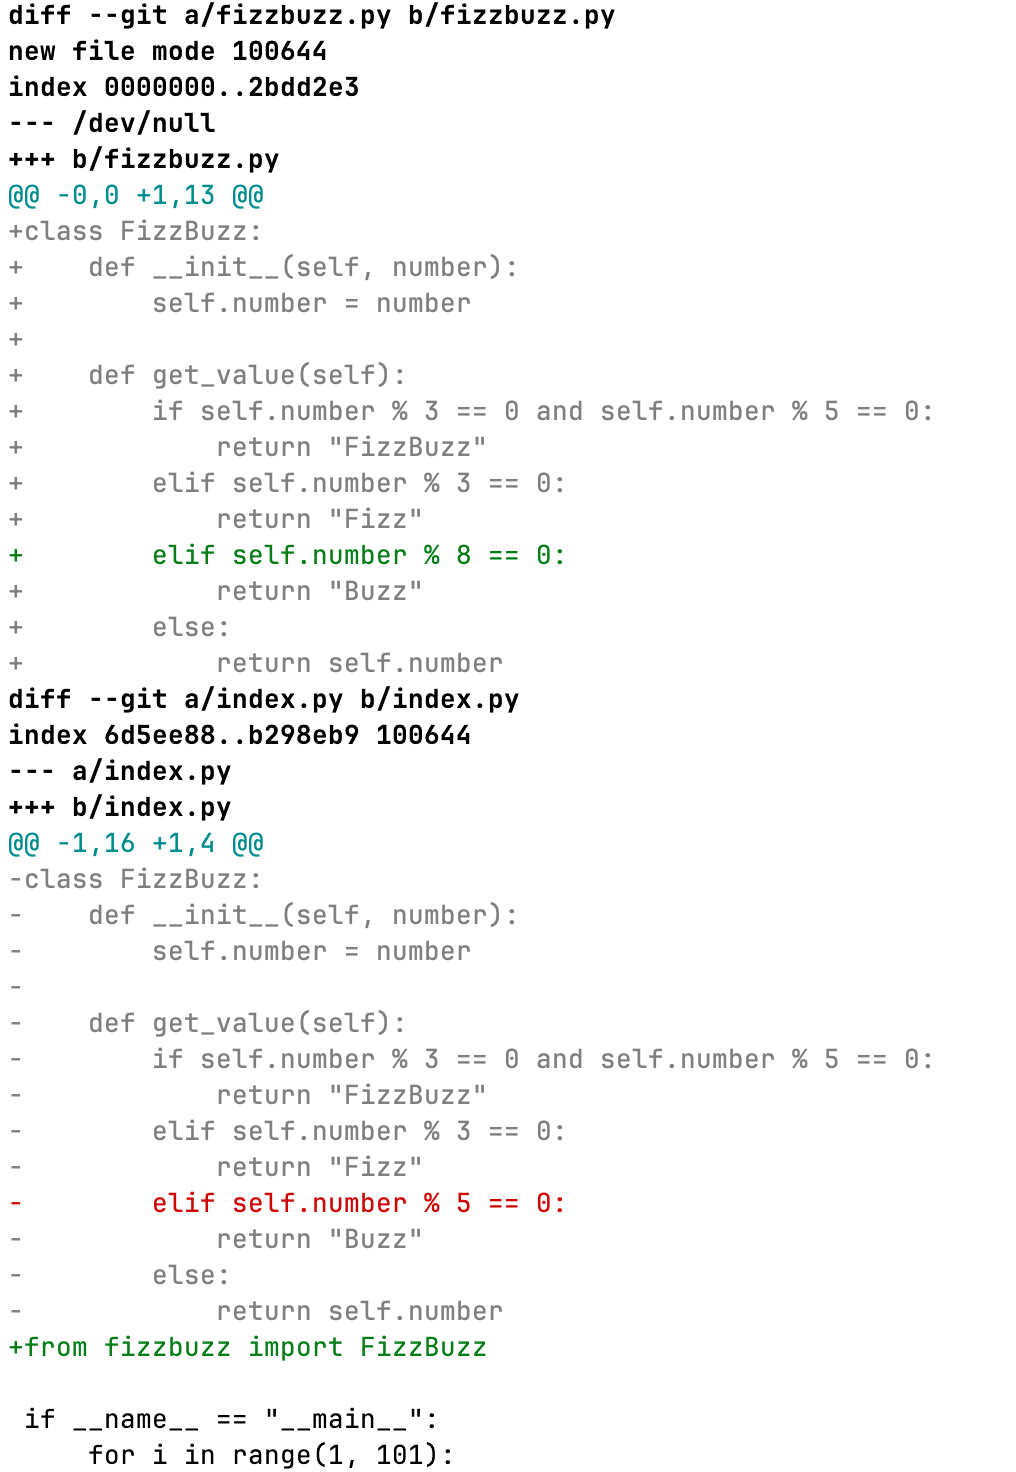 Example of how a code move looks like with git colored move diffs